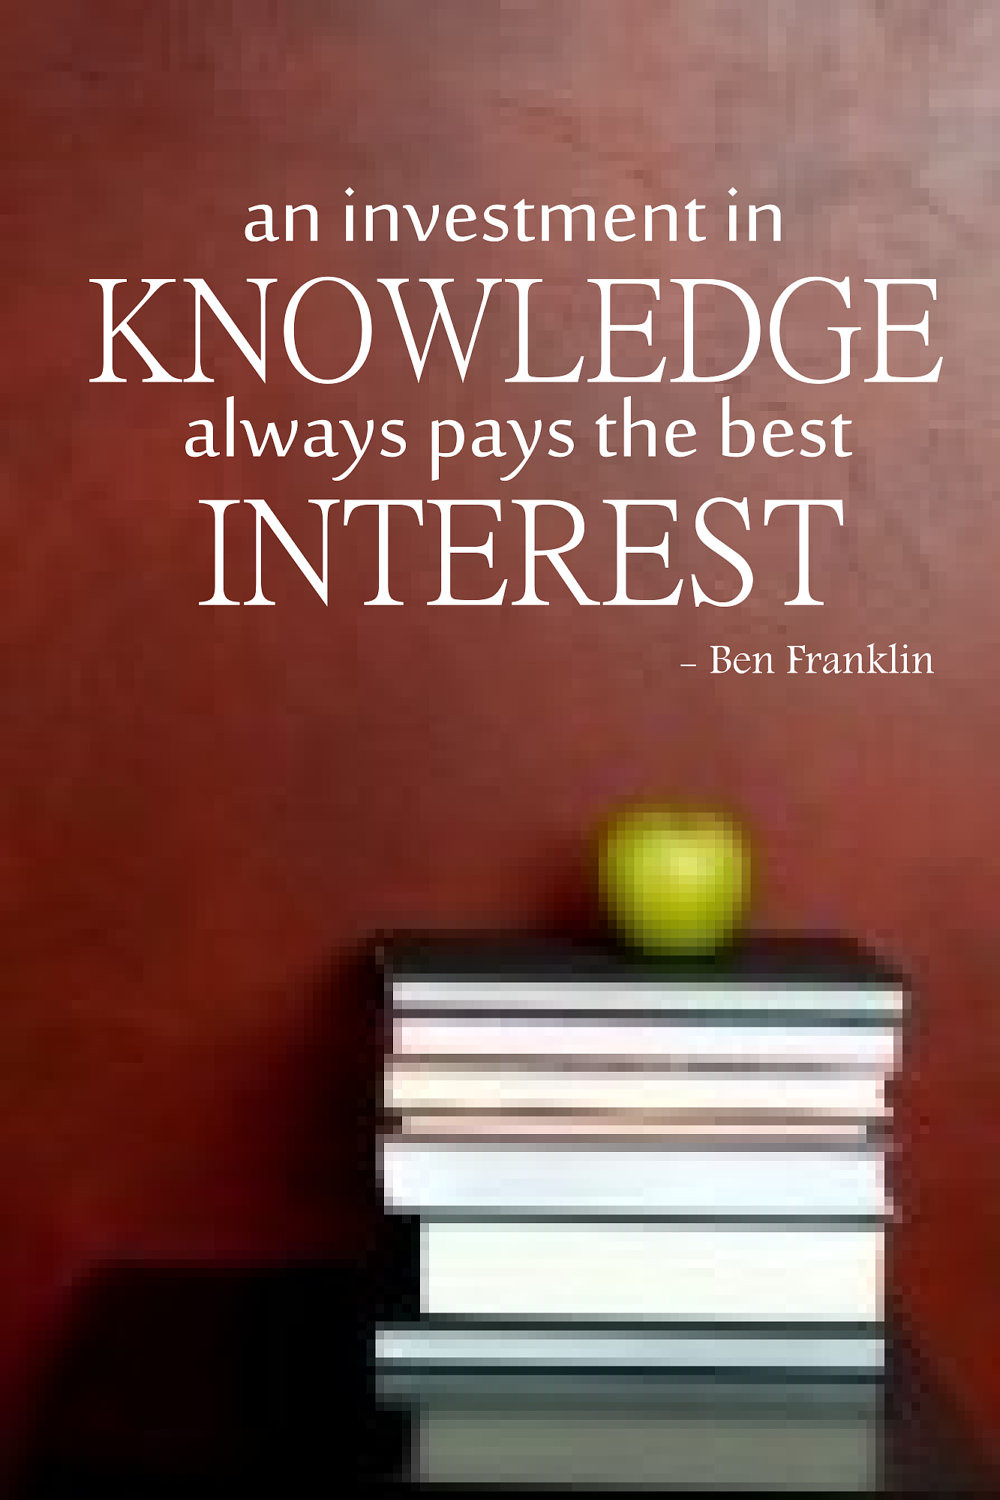 Quote About The Importance Of Education
 Quotes About Education Importance QuotesGram